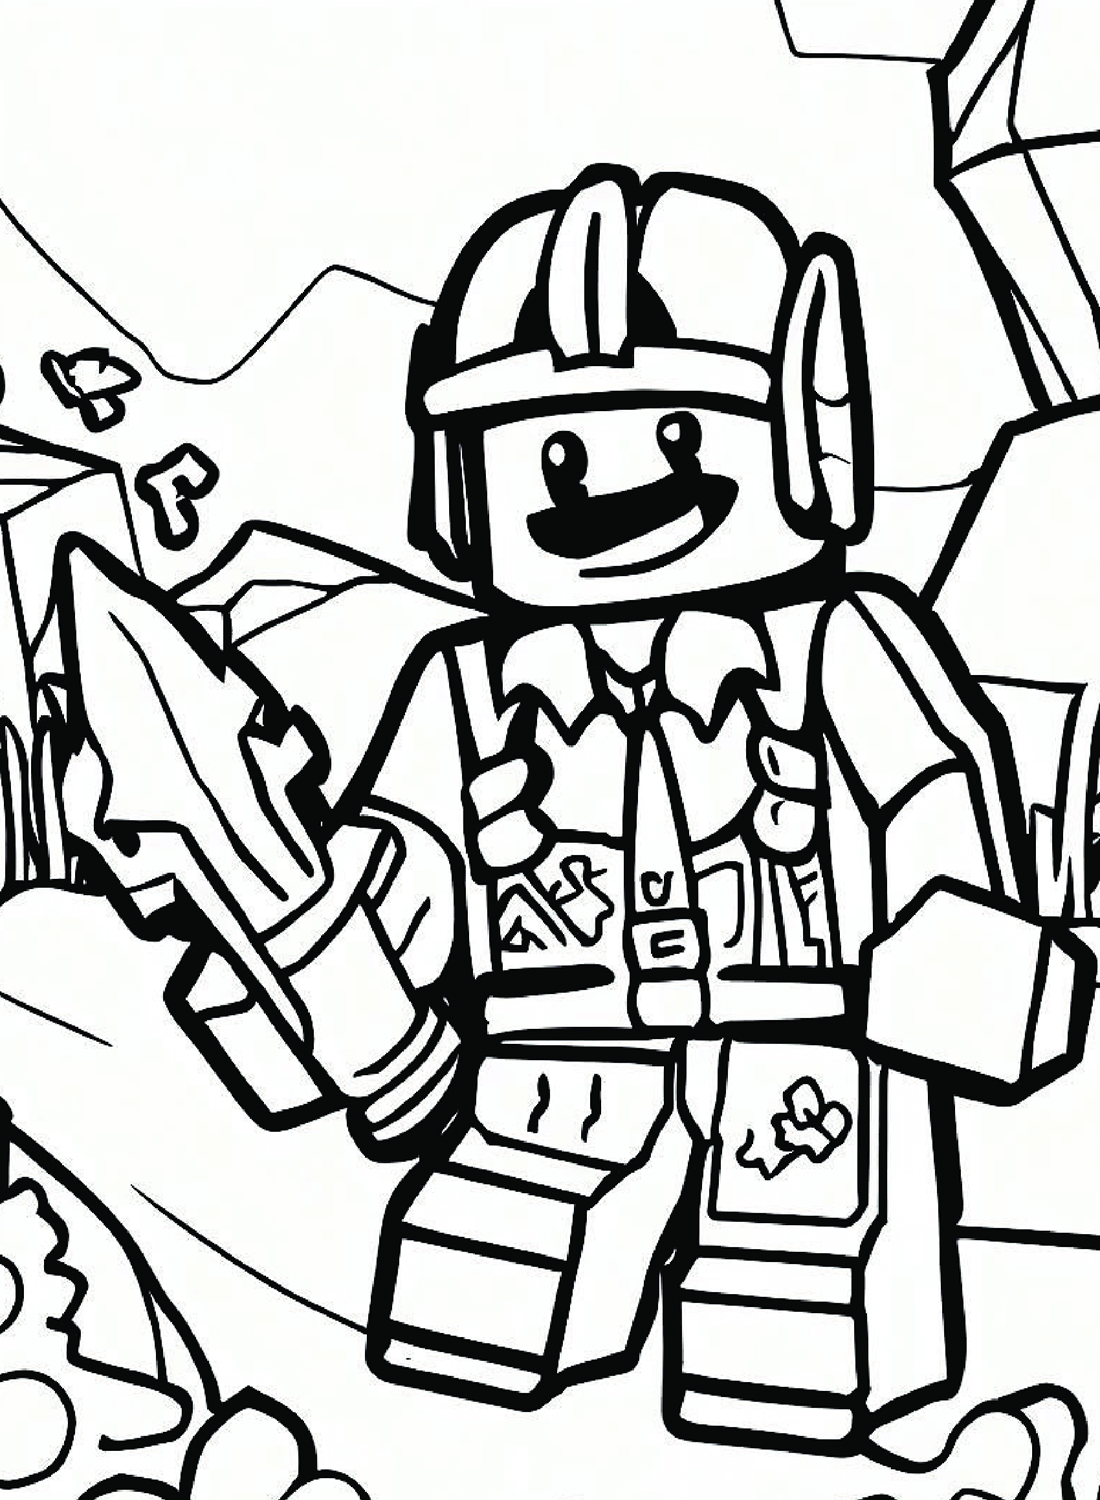 Roblox Coloring Page Free Printable from Roblox